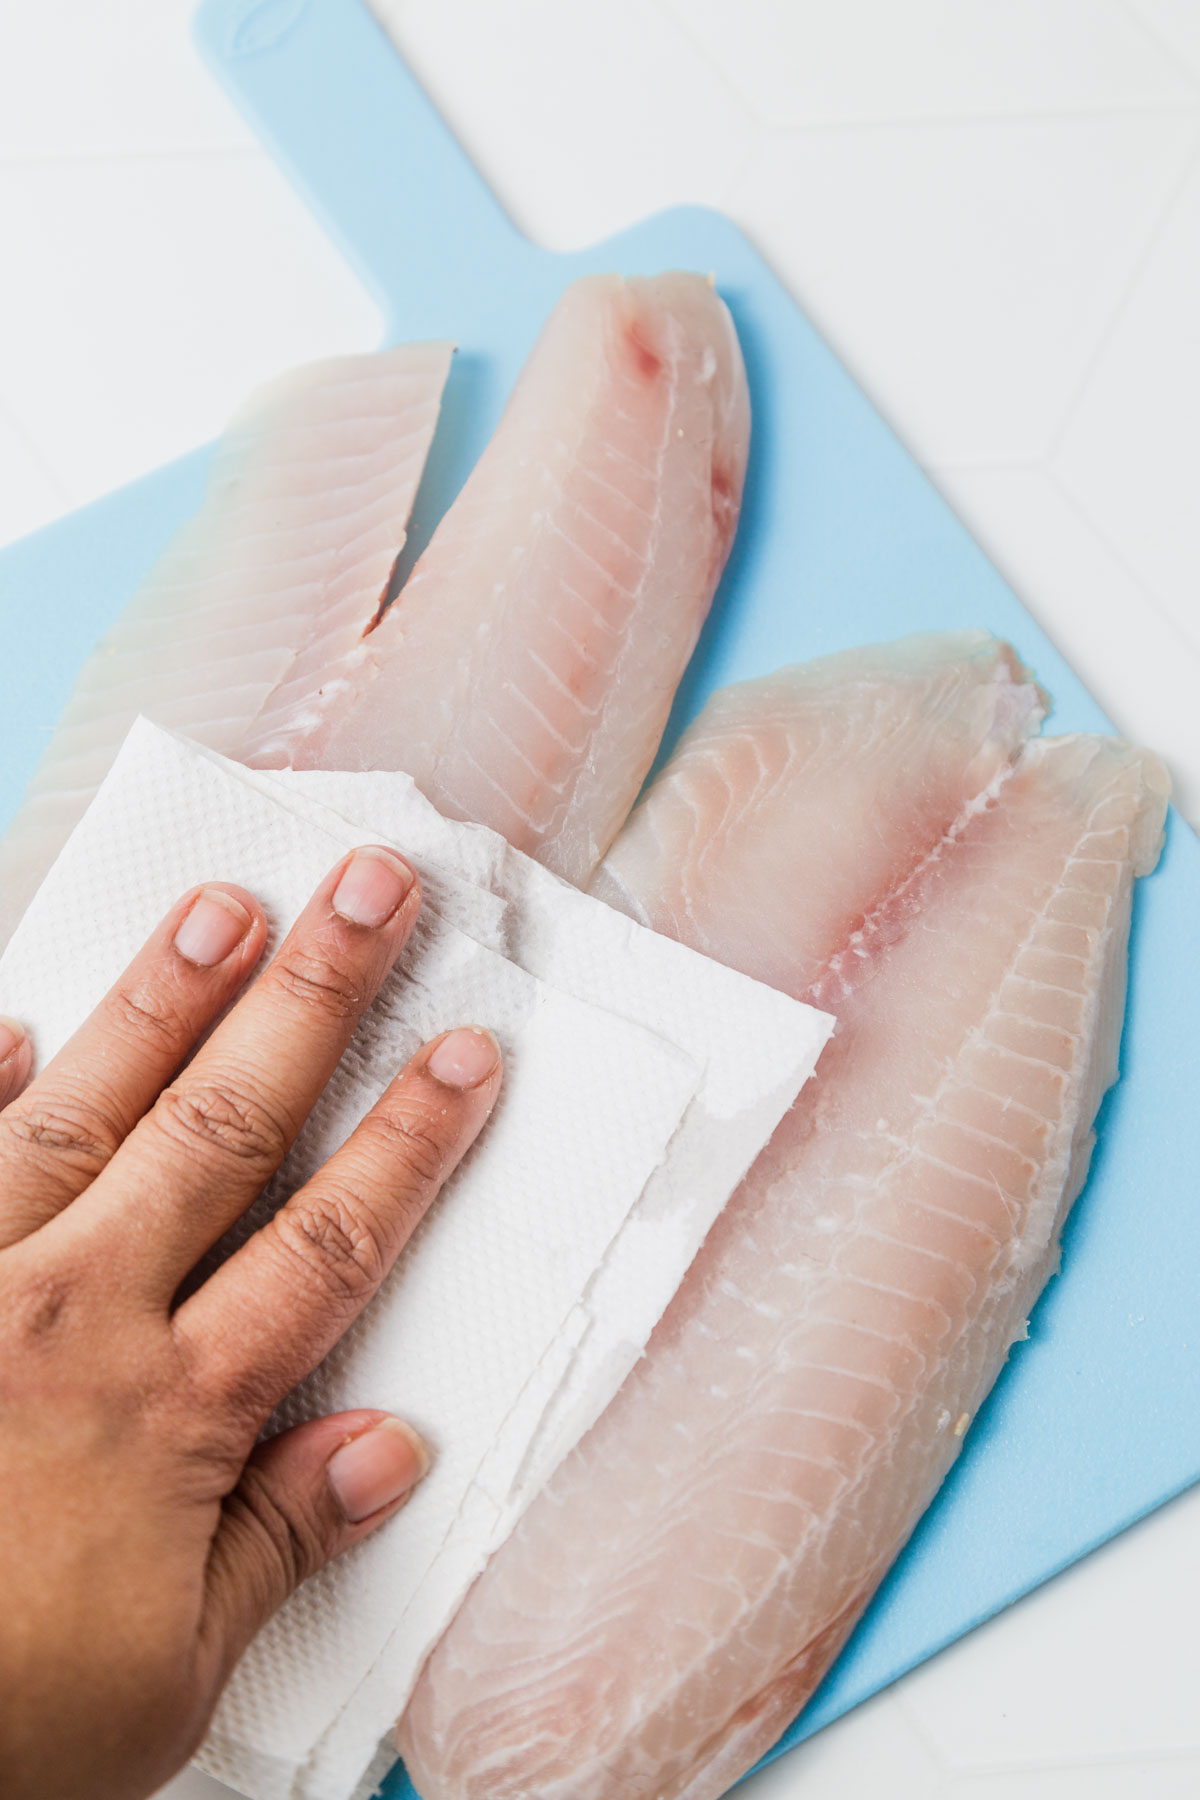 patting the tilapia fillets dry to remove excess moisture.